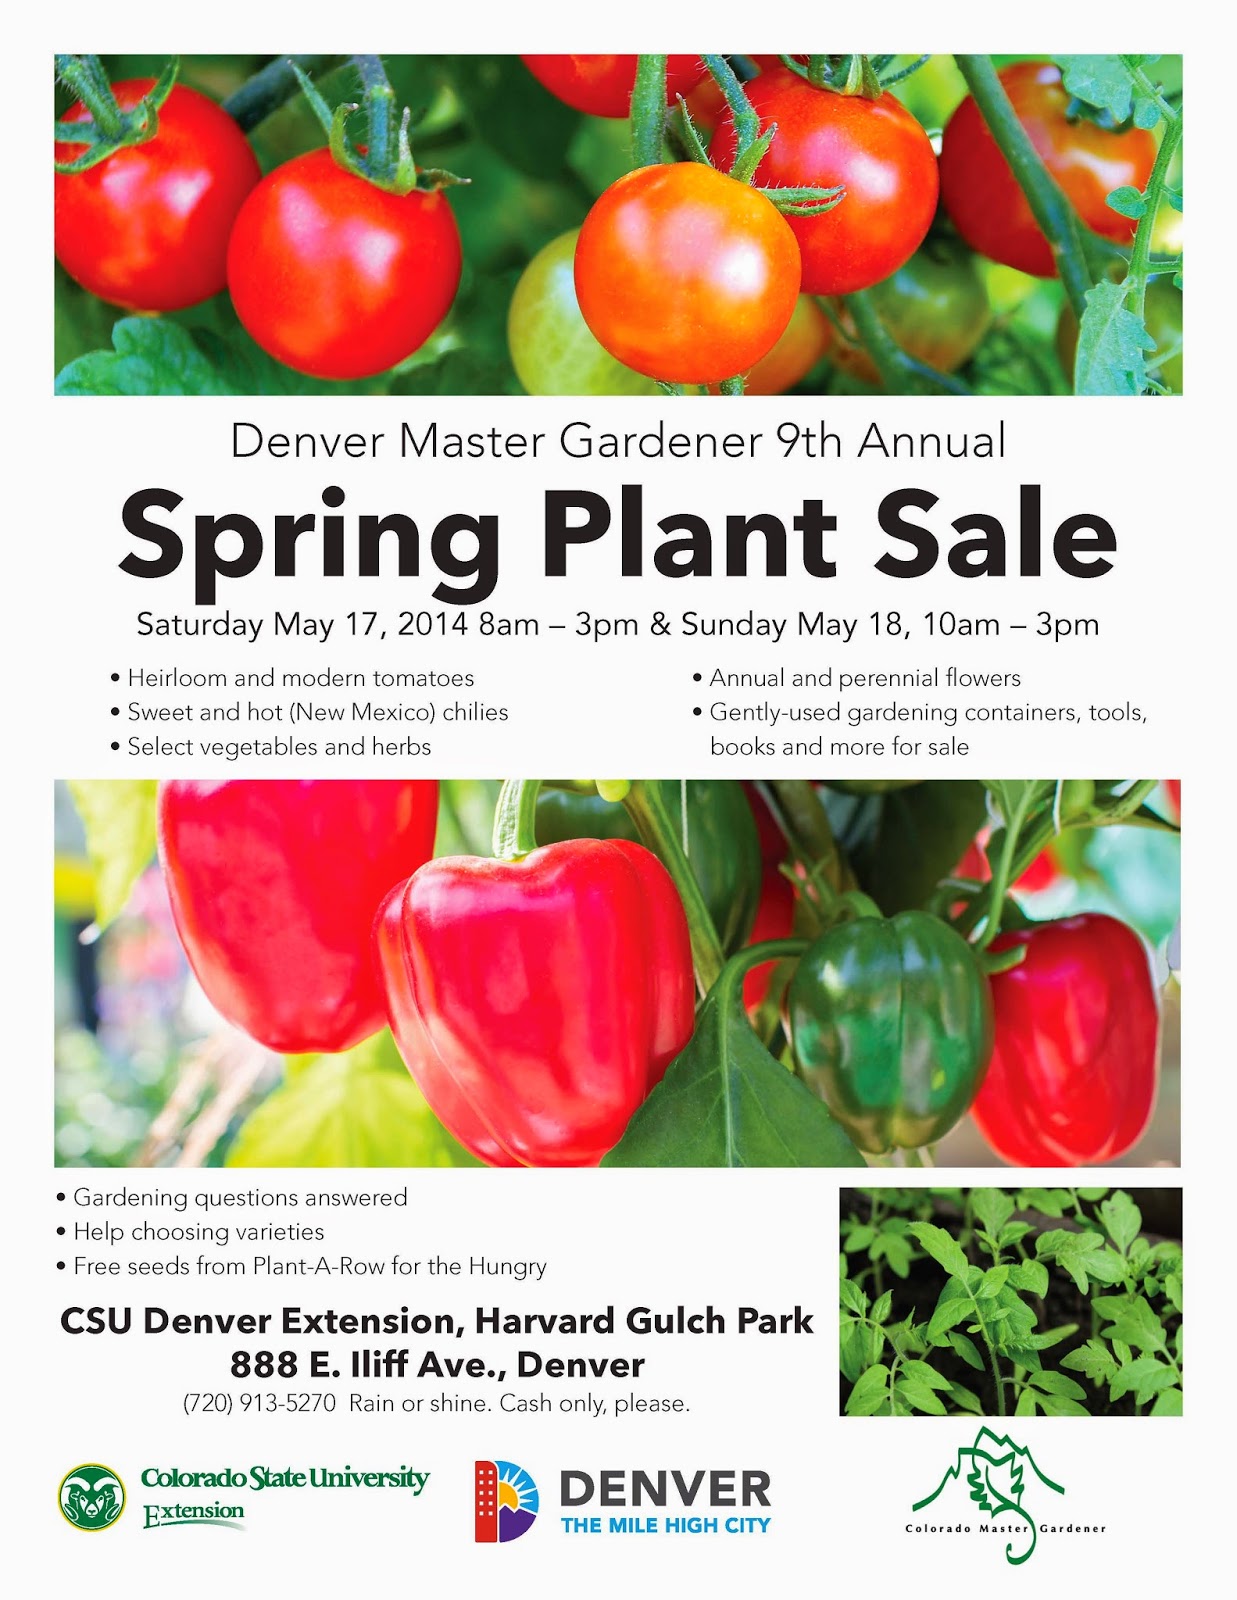 Co Horts Plant Sale In Denver This Weekend